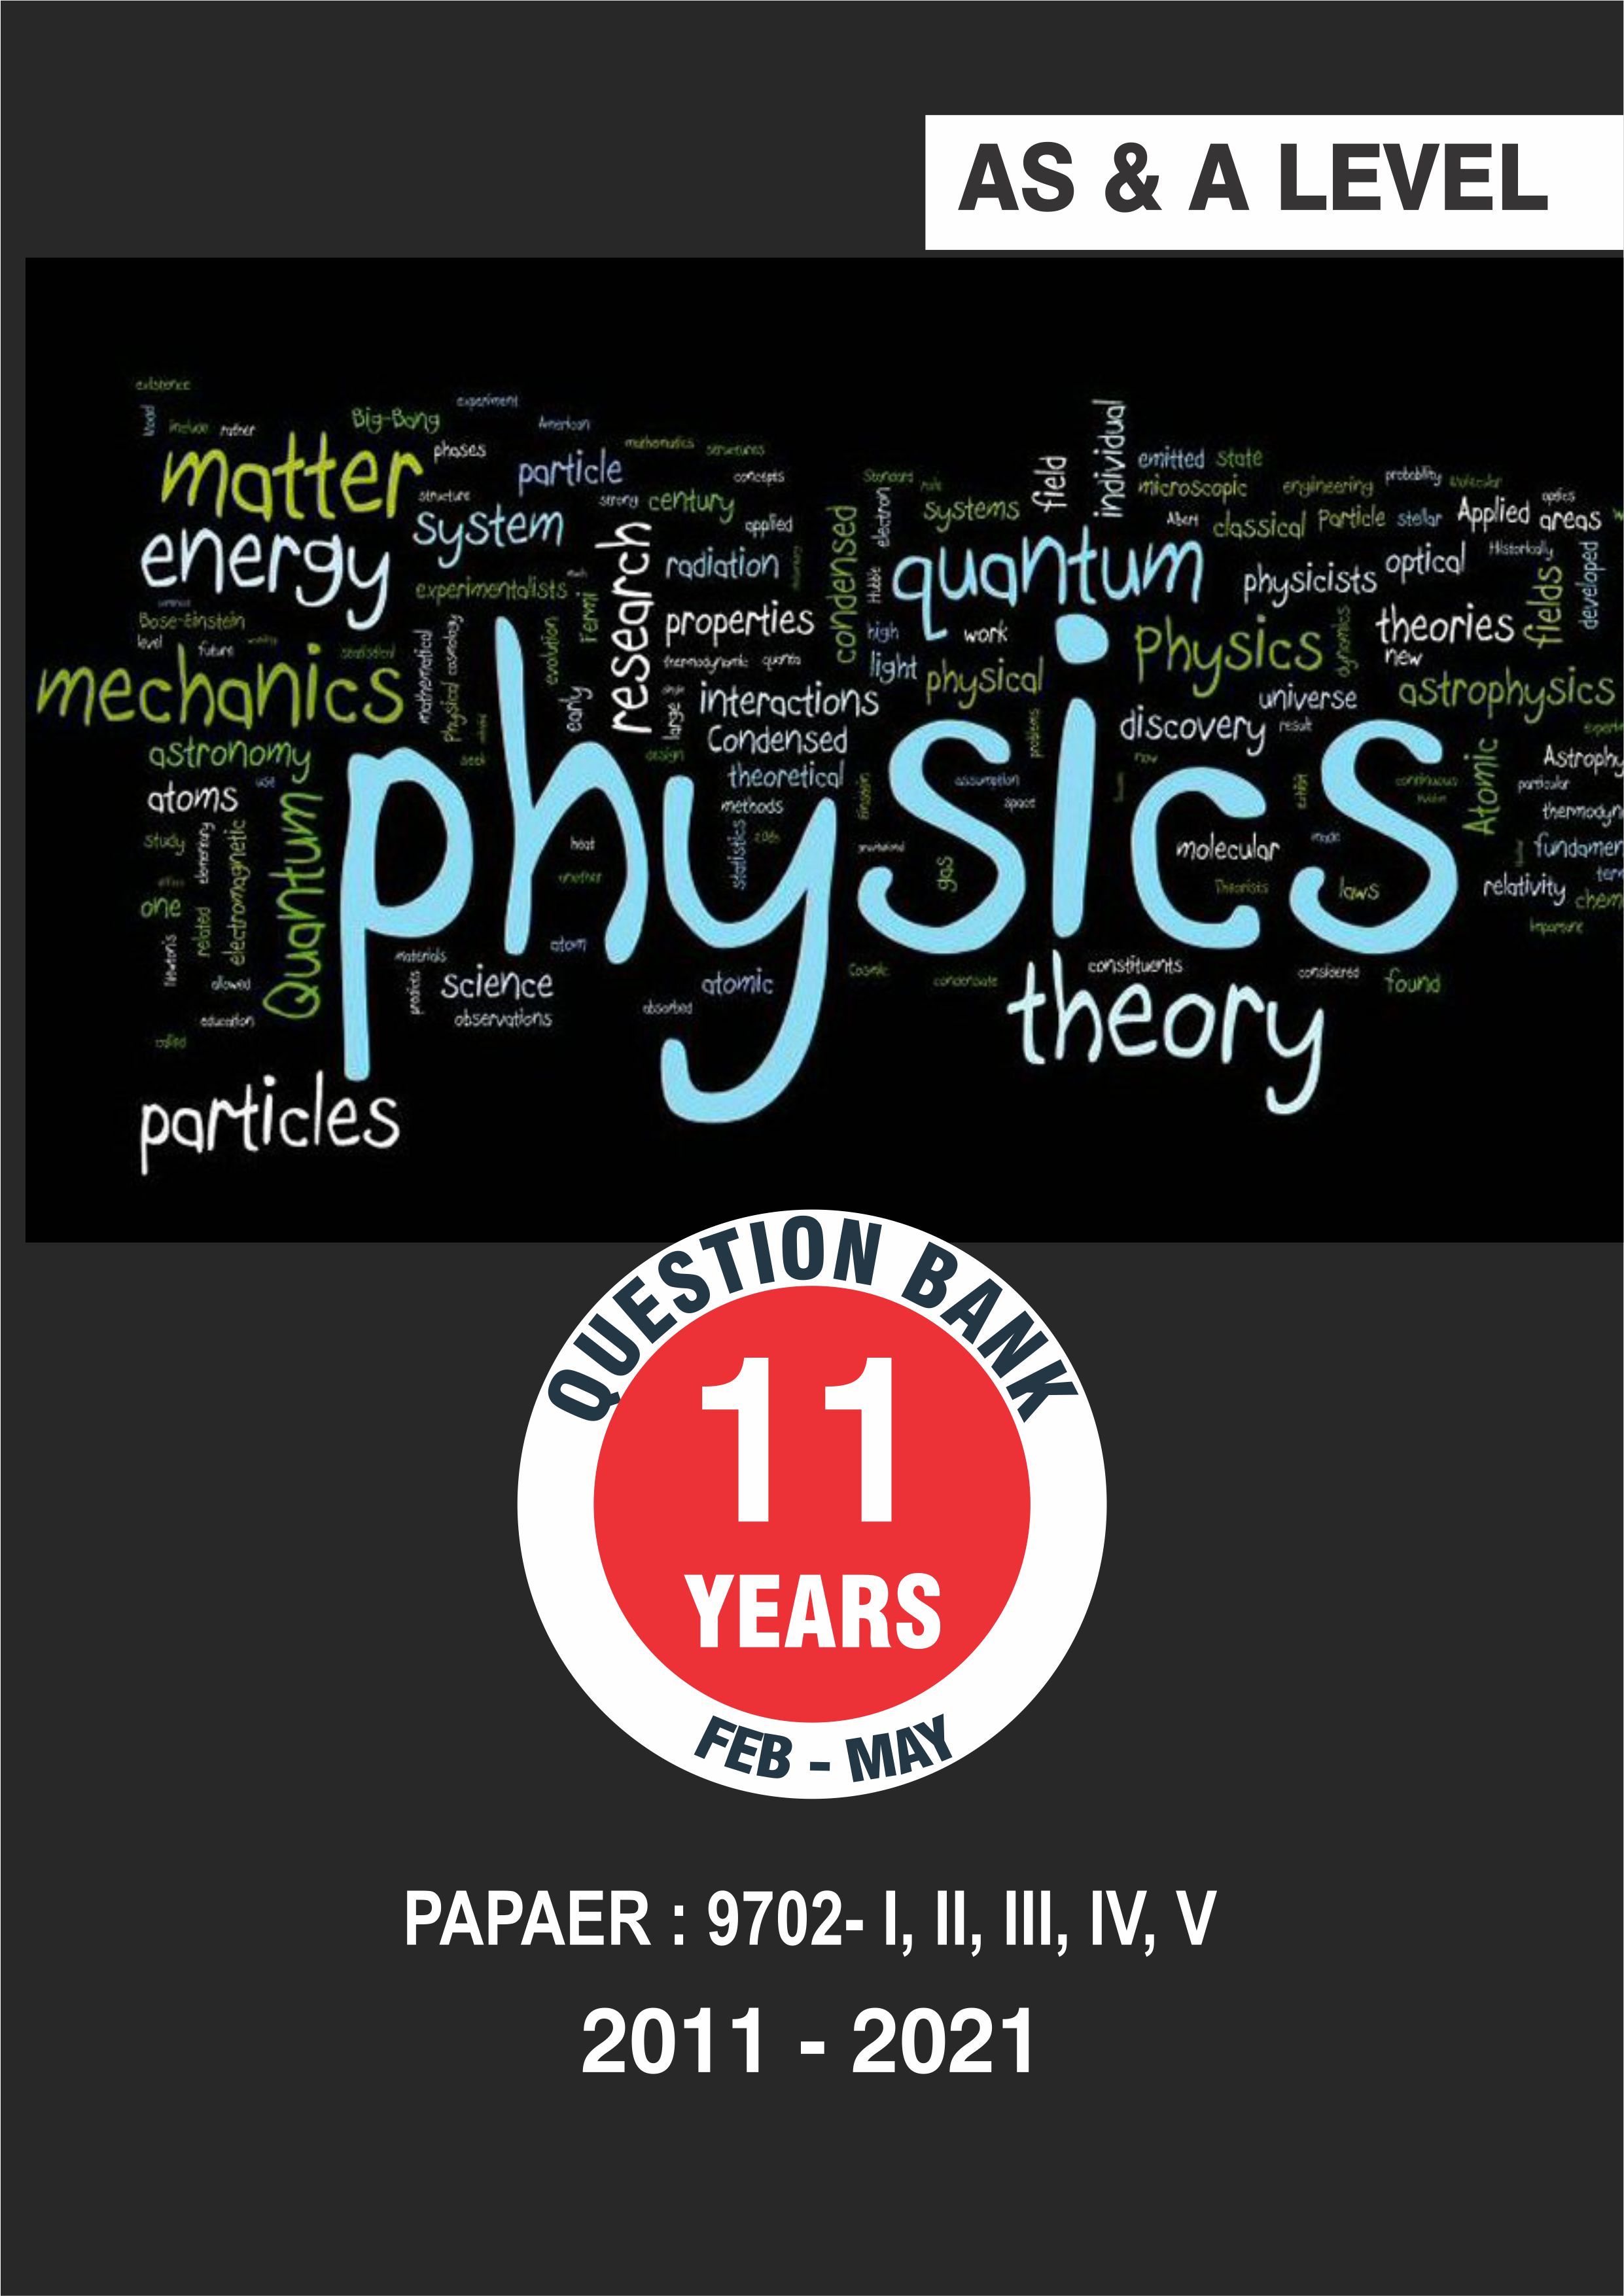 As & A Level Question Bank With Marking Schemes- Physics Paper Code 9702 Past 11 Years